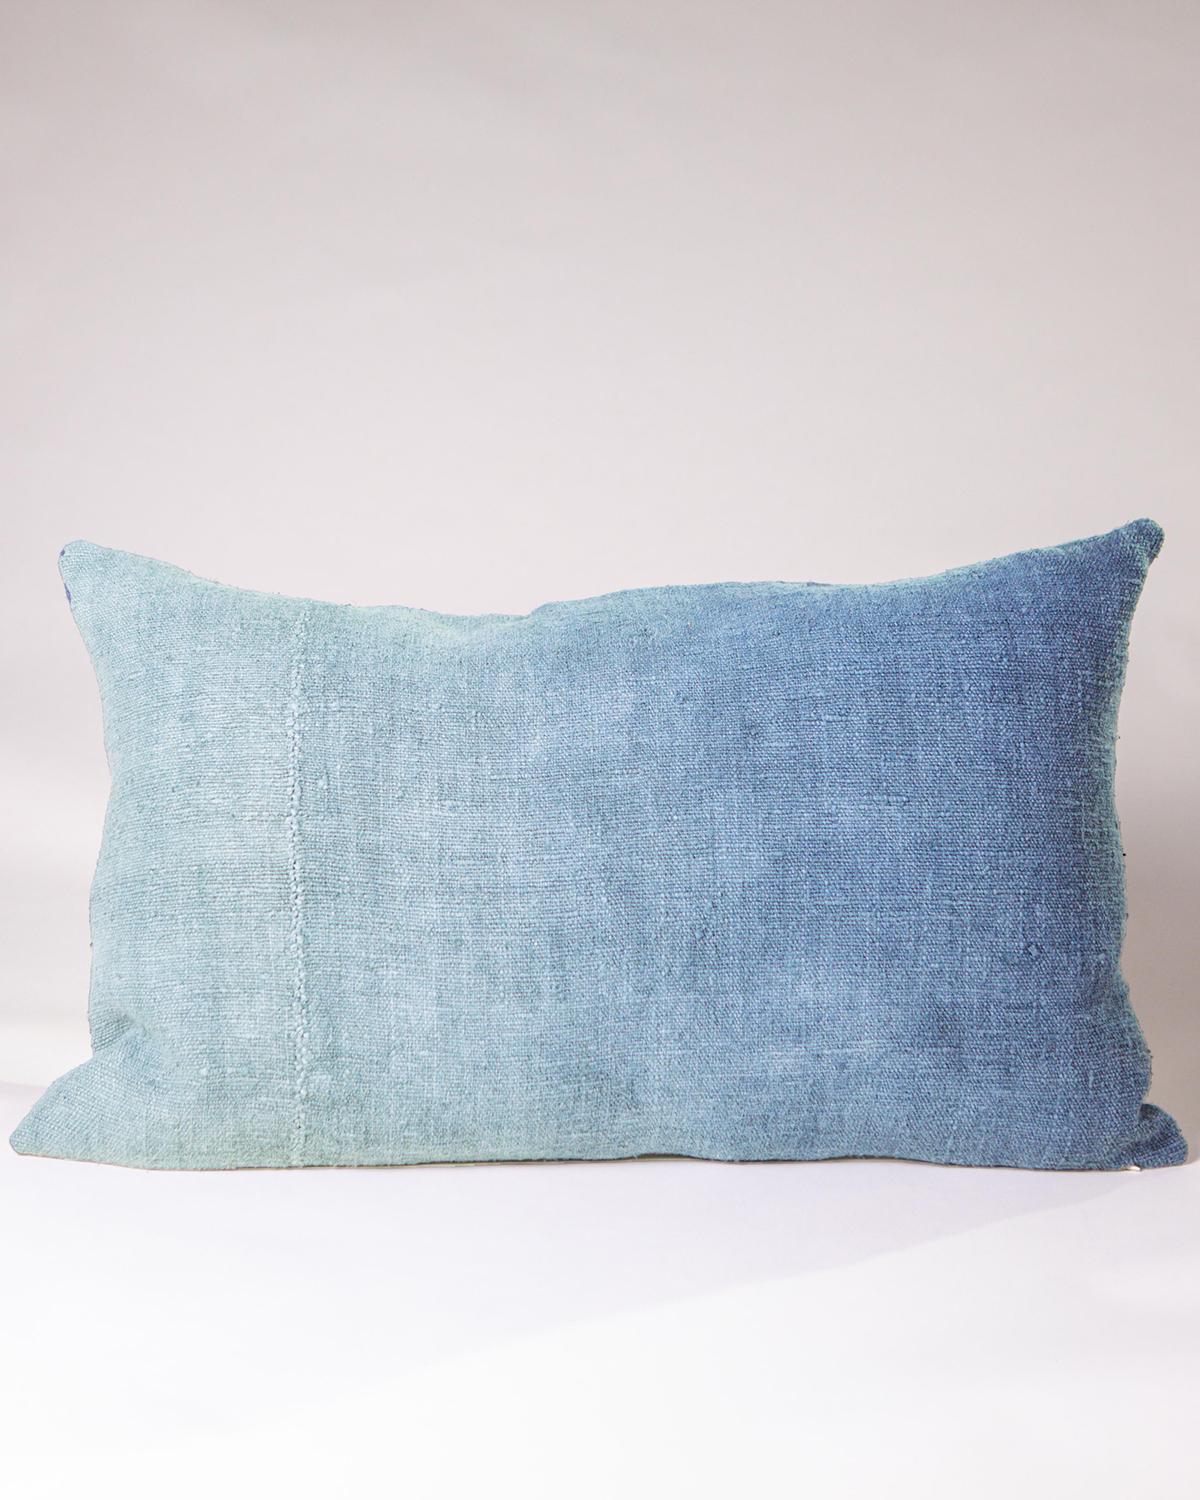 Spanish Espanyolet Hand-Painted Vintage Linen Throw Pillow in Blue 16